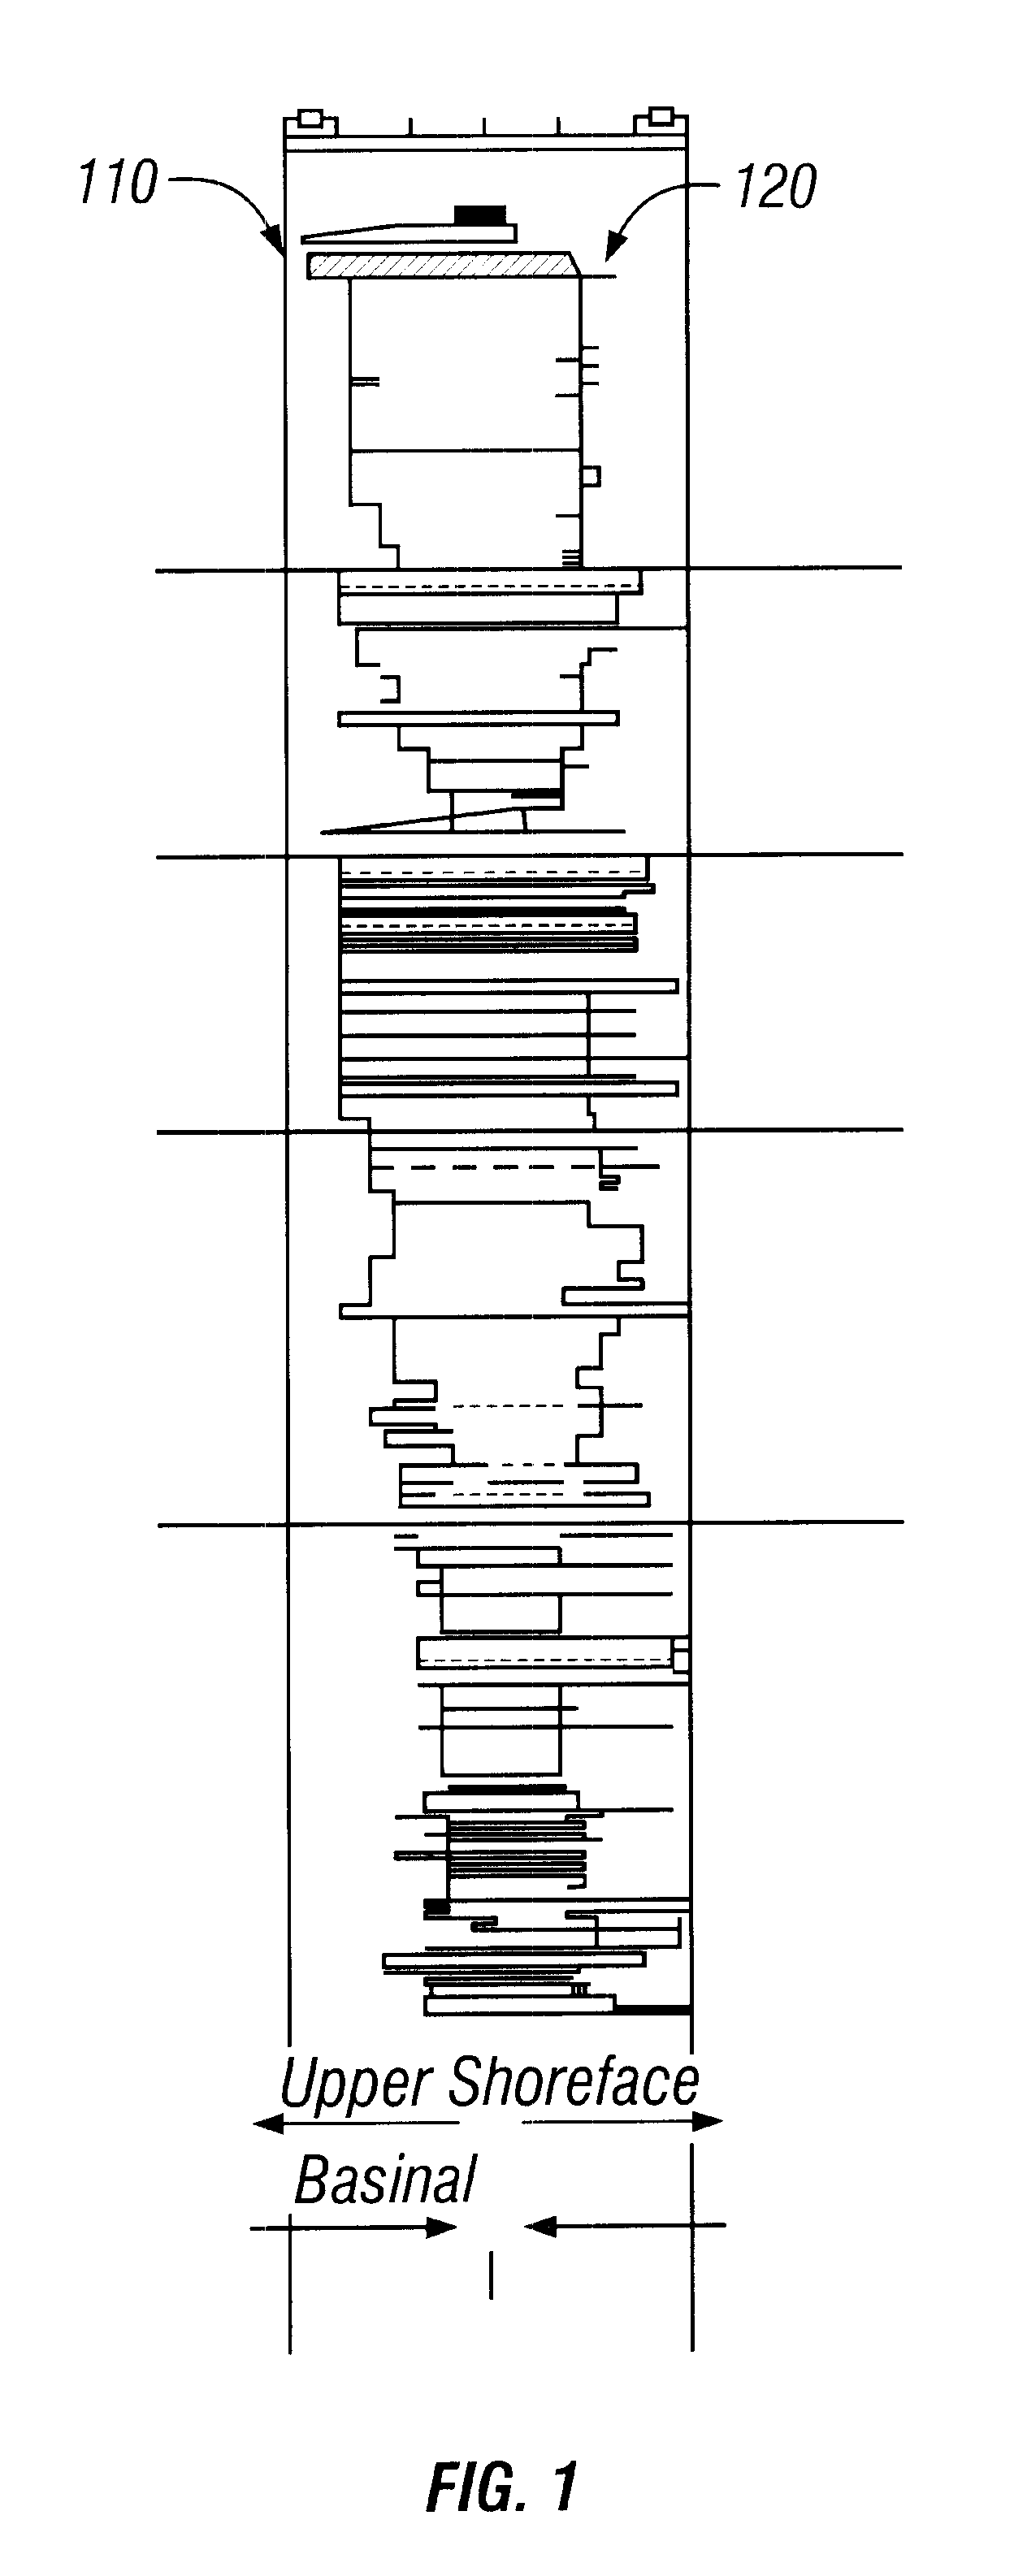 Coarse-to-fine self-organizing map for automatic electrofacies ordering